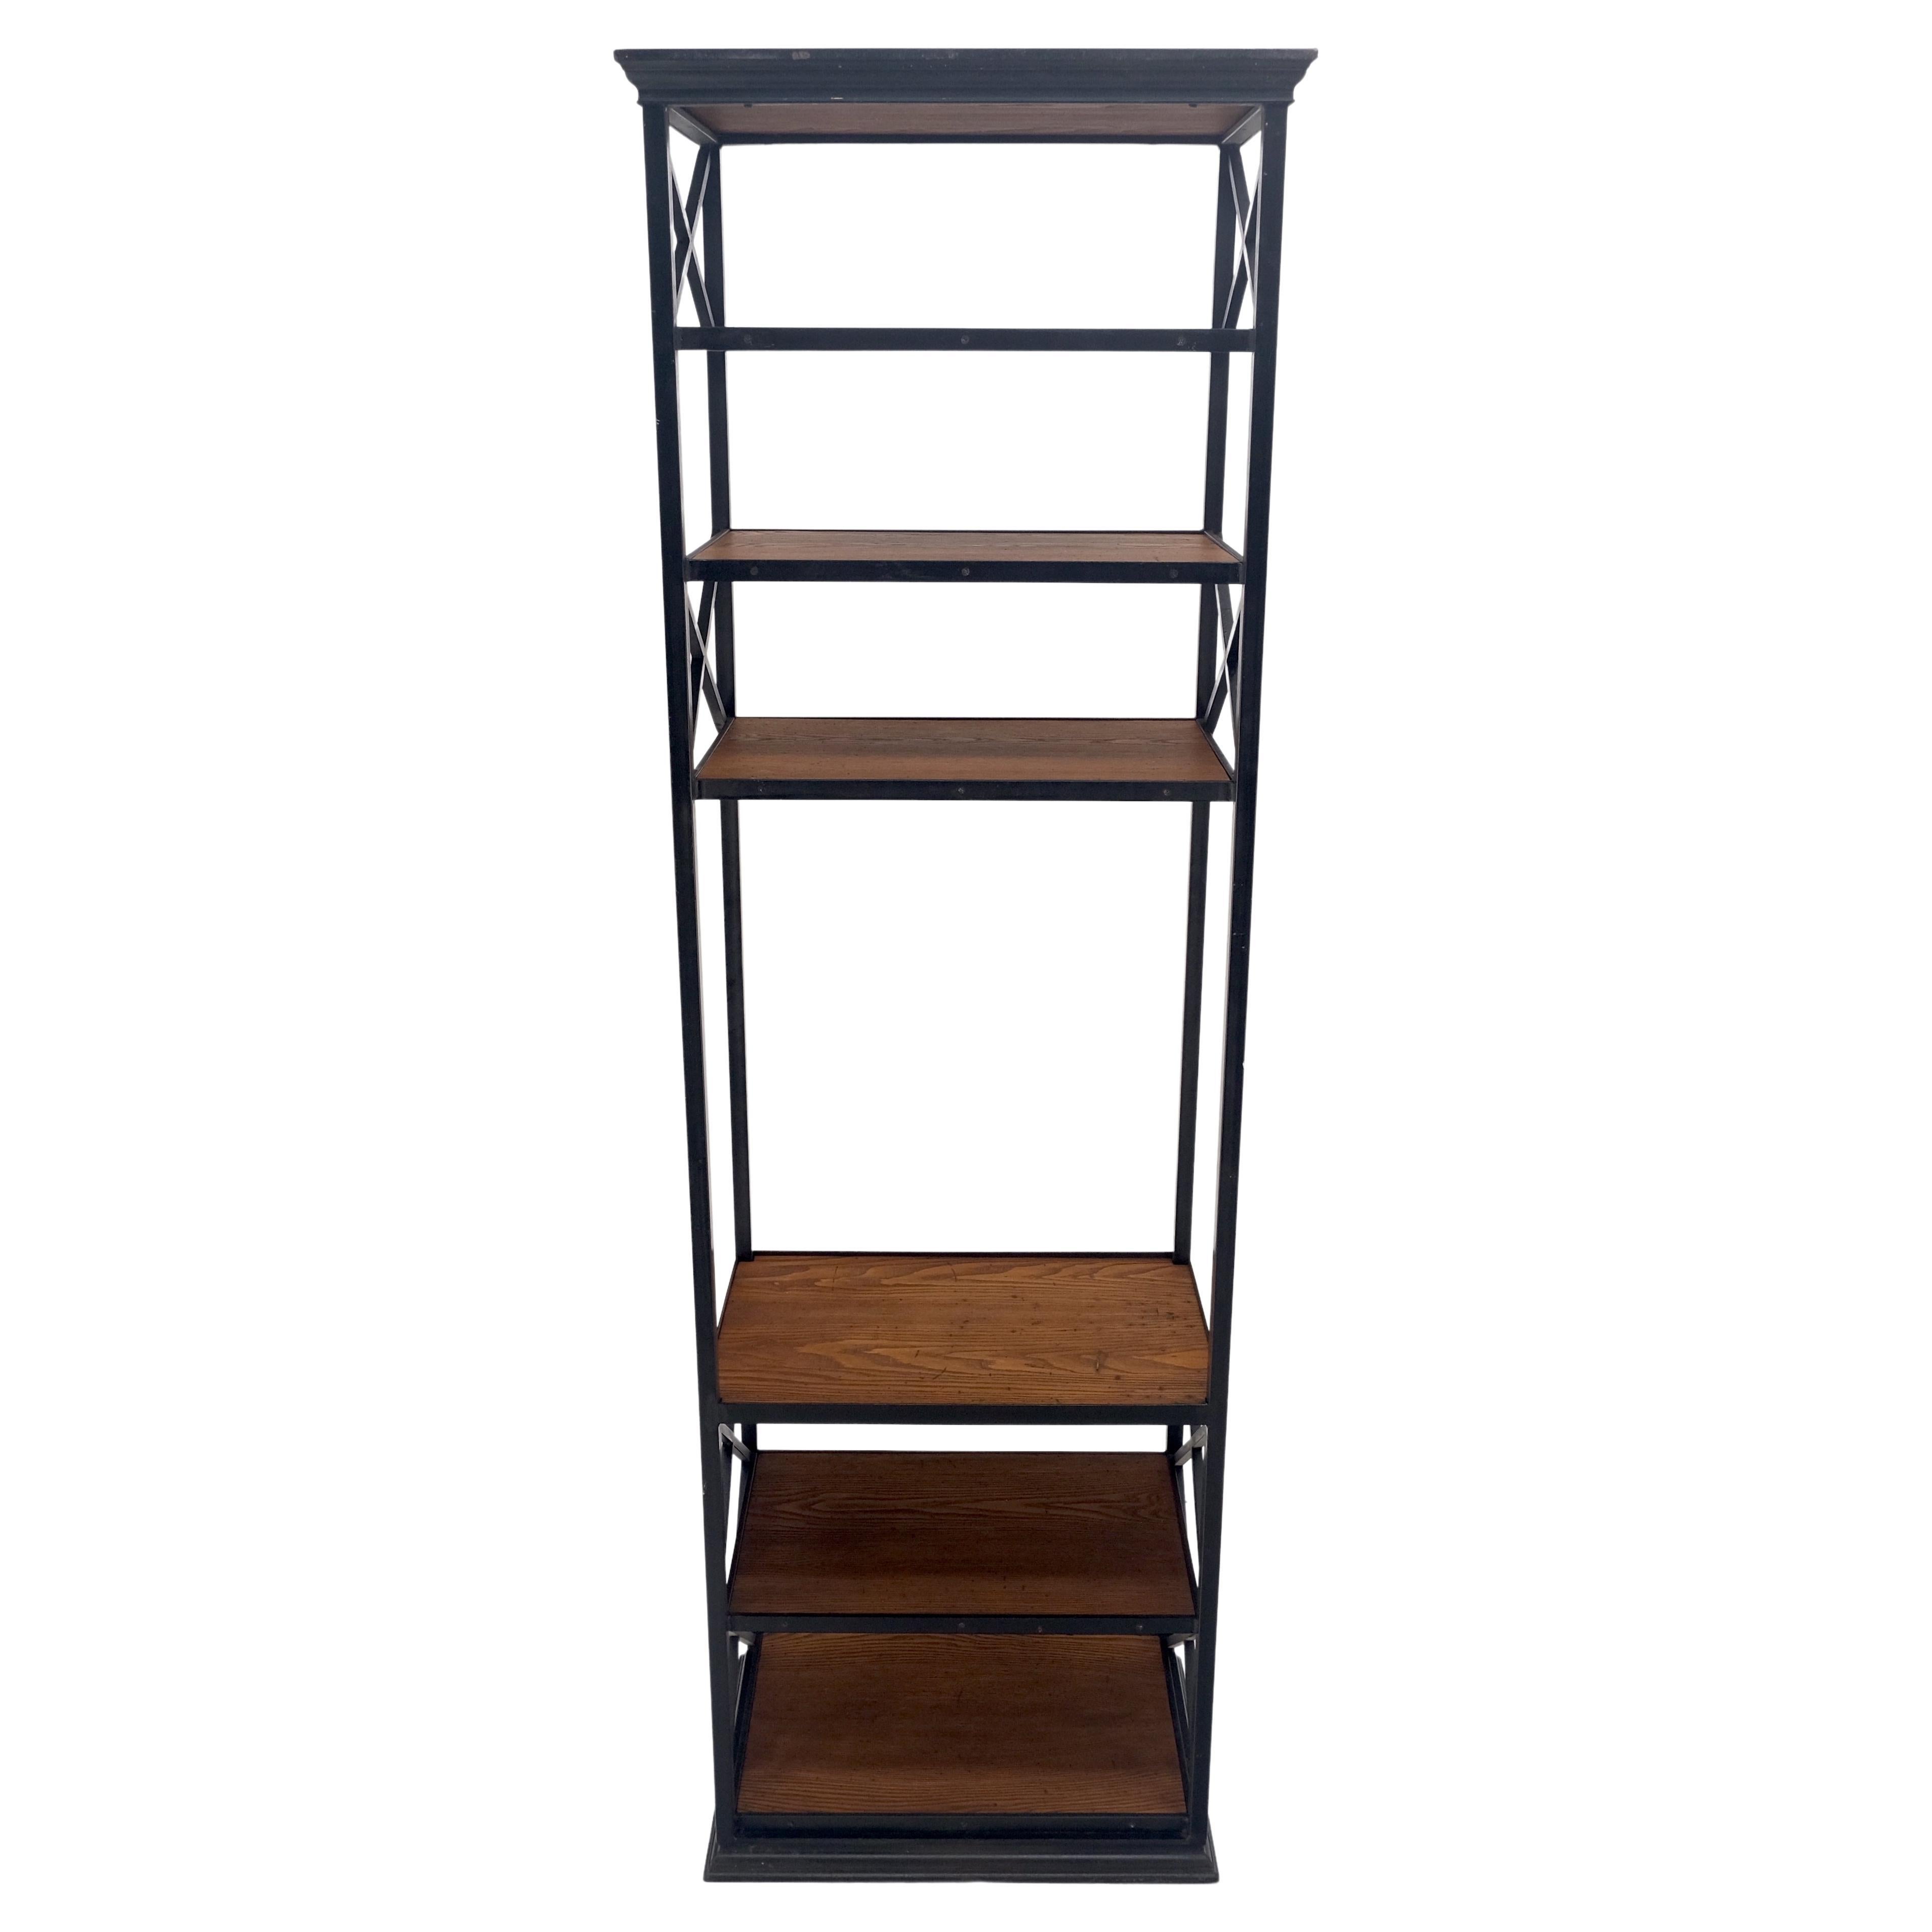 8 foot tall bookcase